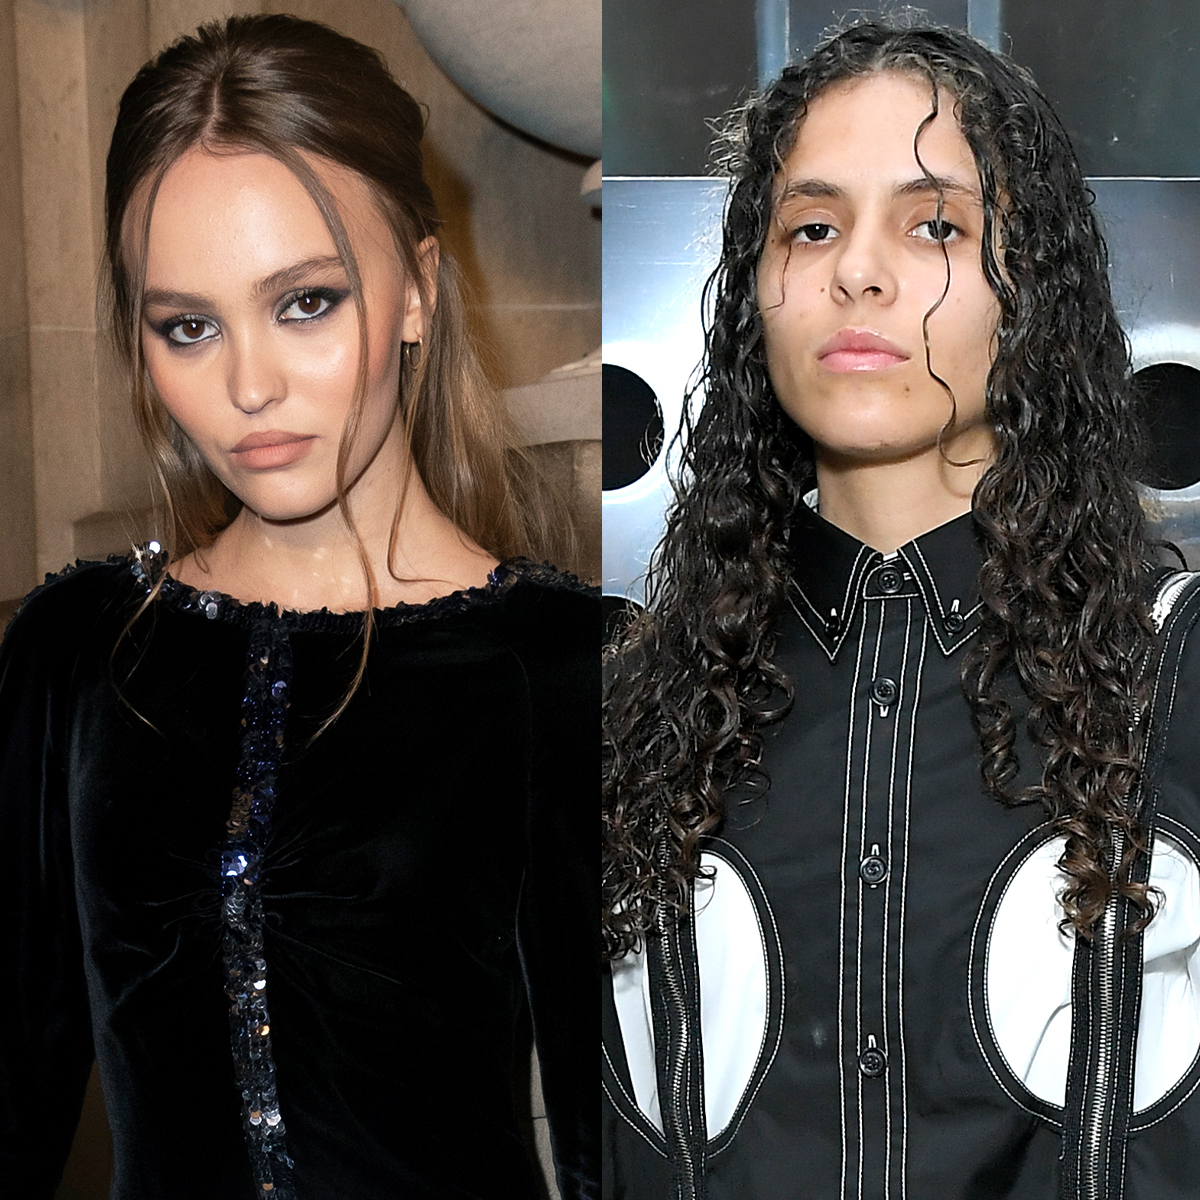 Rs 1200x1200 230512130214 1200 Lily Rose Depp And 070 Shake Gj ?fit=around|1080 1080&output Quality=90&crop=1080 1080;center,top